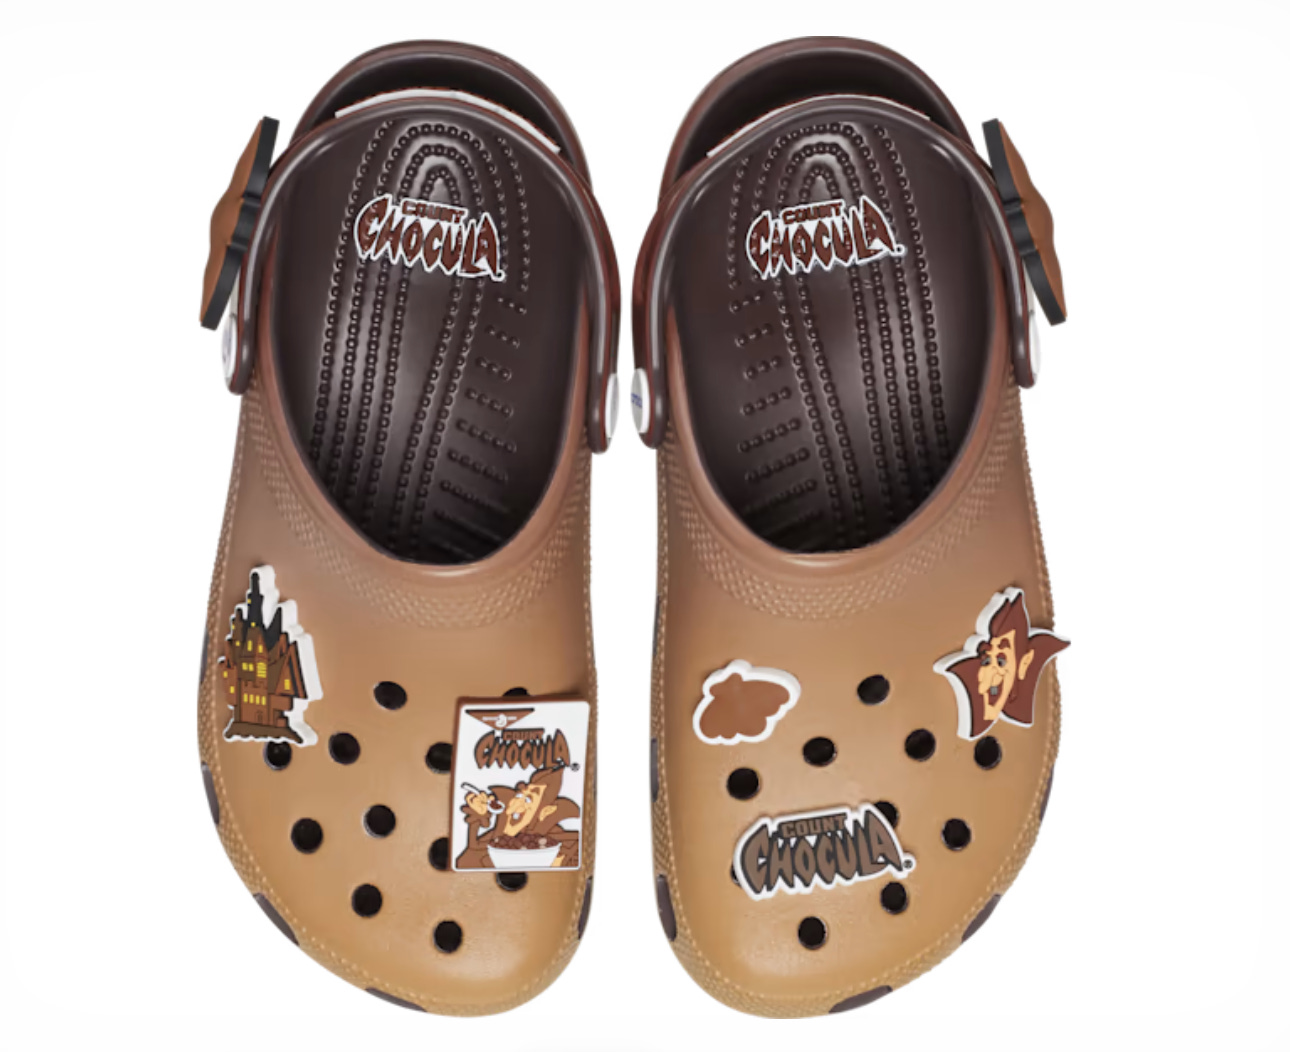 A pair of brown Count Chocula branded clogs with cereal-themed Jibbitz